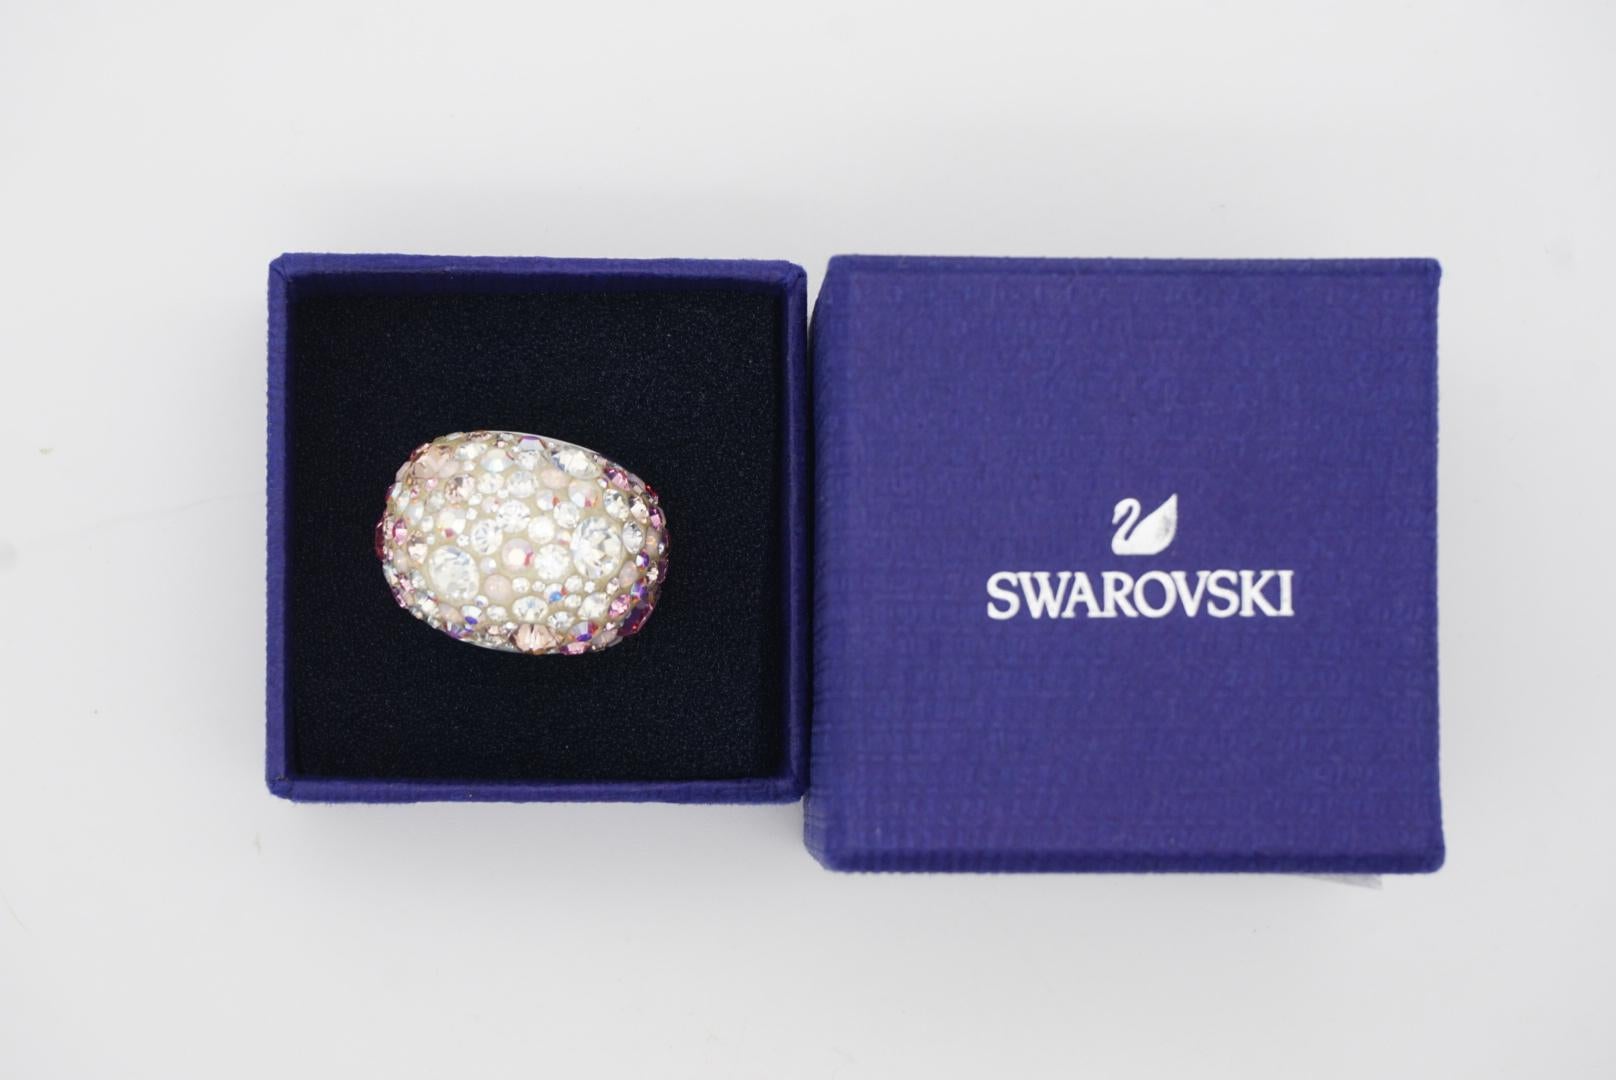 Swarovski Nirvana Fully Cut Crystal Glitter Pink White Chunky Ring, Size 55 UK N In Excellent Condition For Sale In Wokingham, England